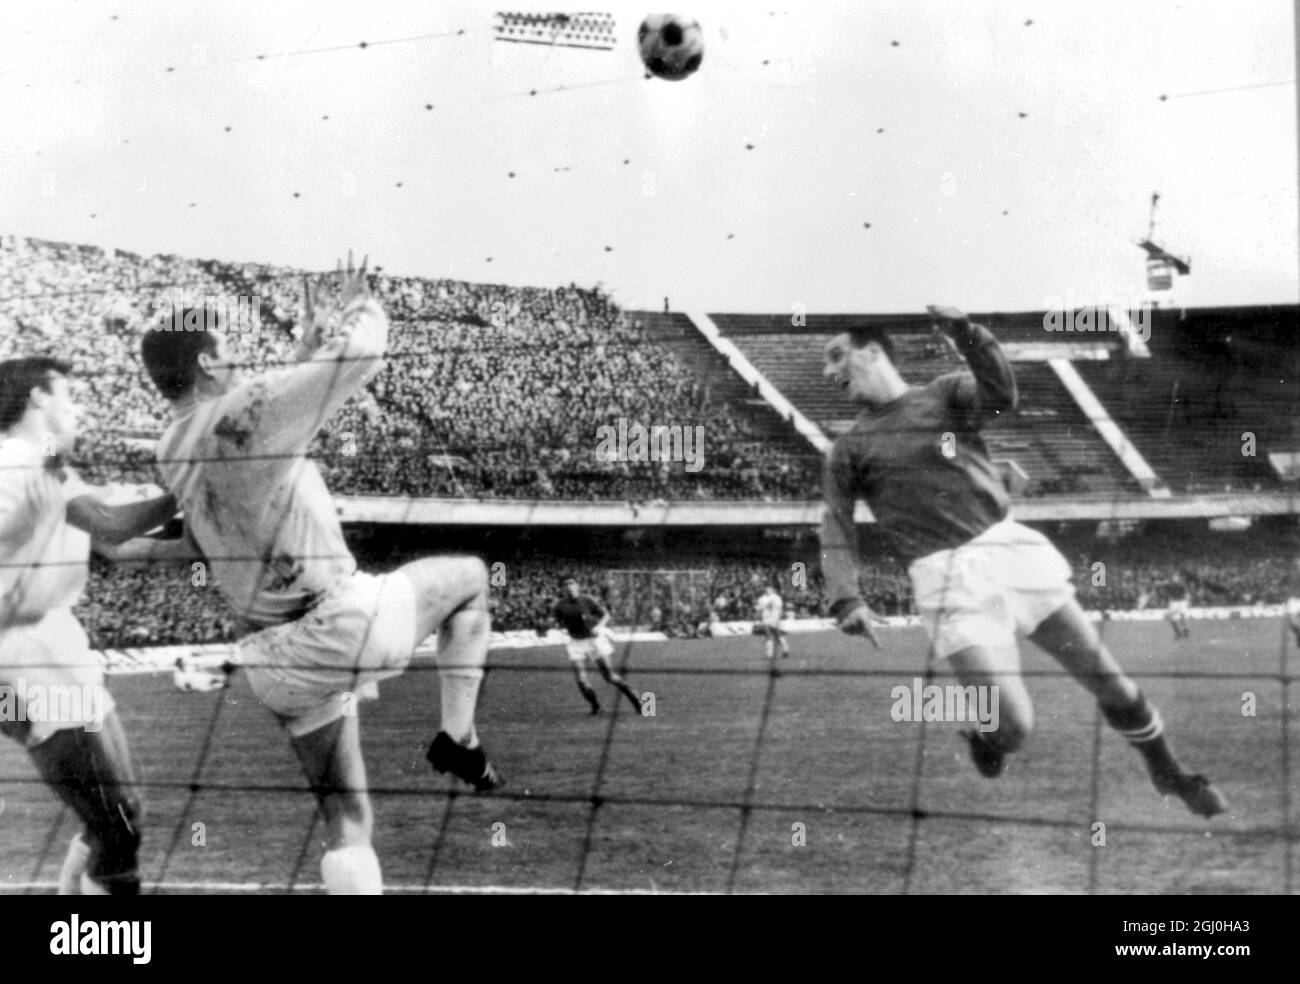 Naples, Italy: Italian left back Facchetti scoring the second goal at the 73rd minute of the second half of today's Italy-Scotland and World Cup Soccer Eliminator which Italy won 3-0. 7 December 1965 Stock Photo